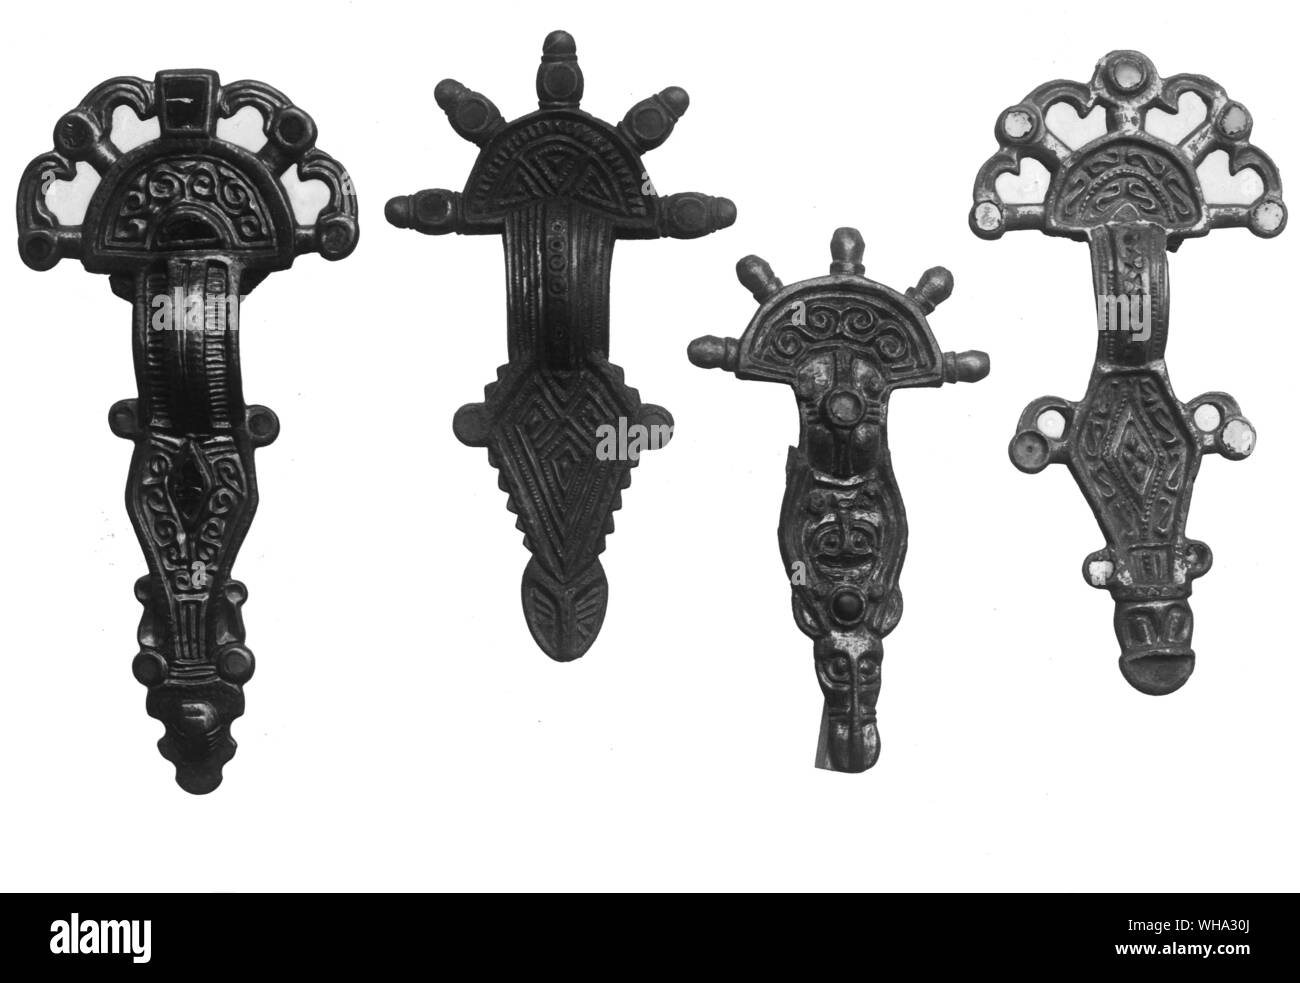 Group of Teutonic brooches from various sites in Europe. Stock Photo